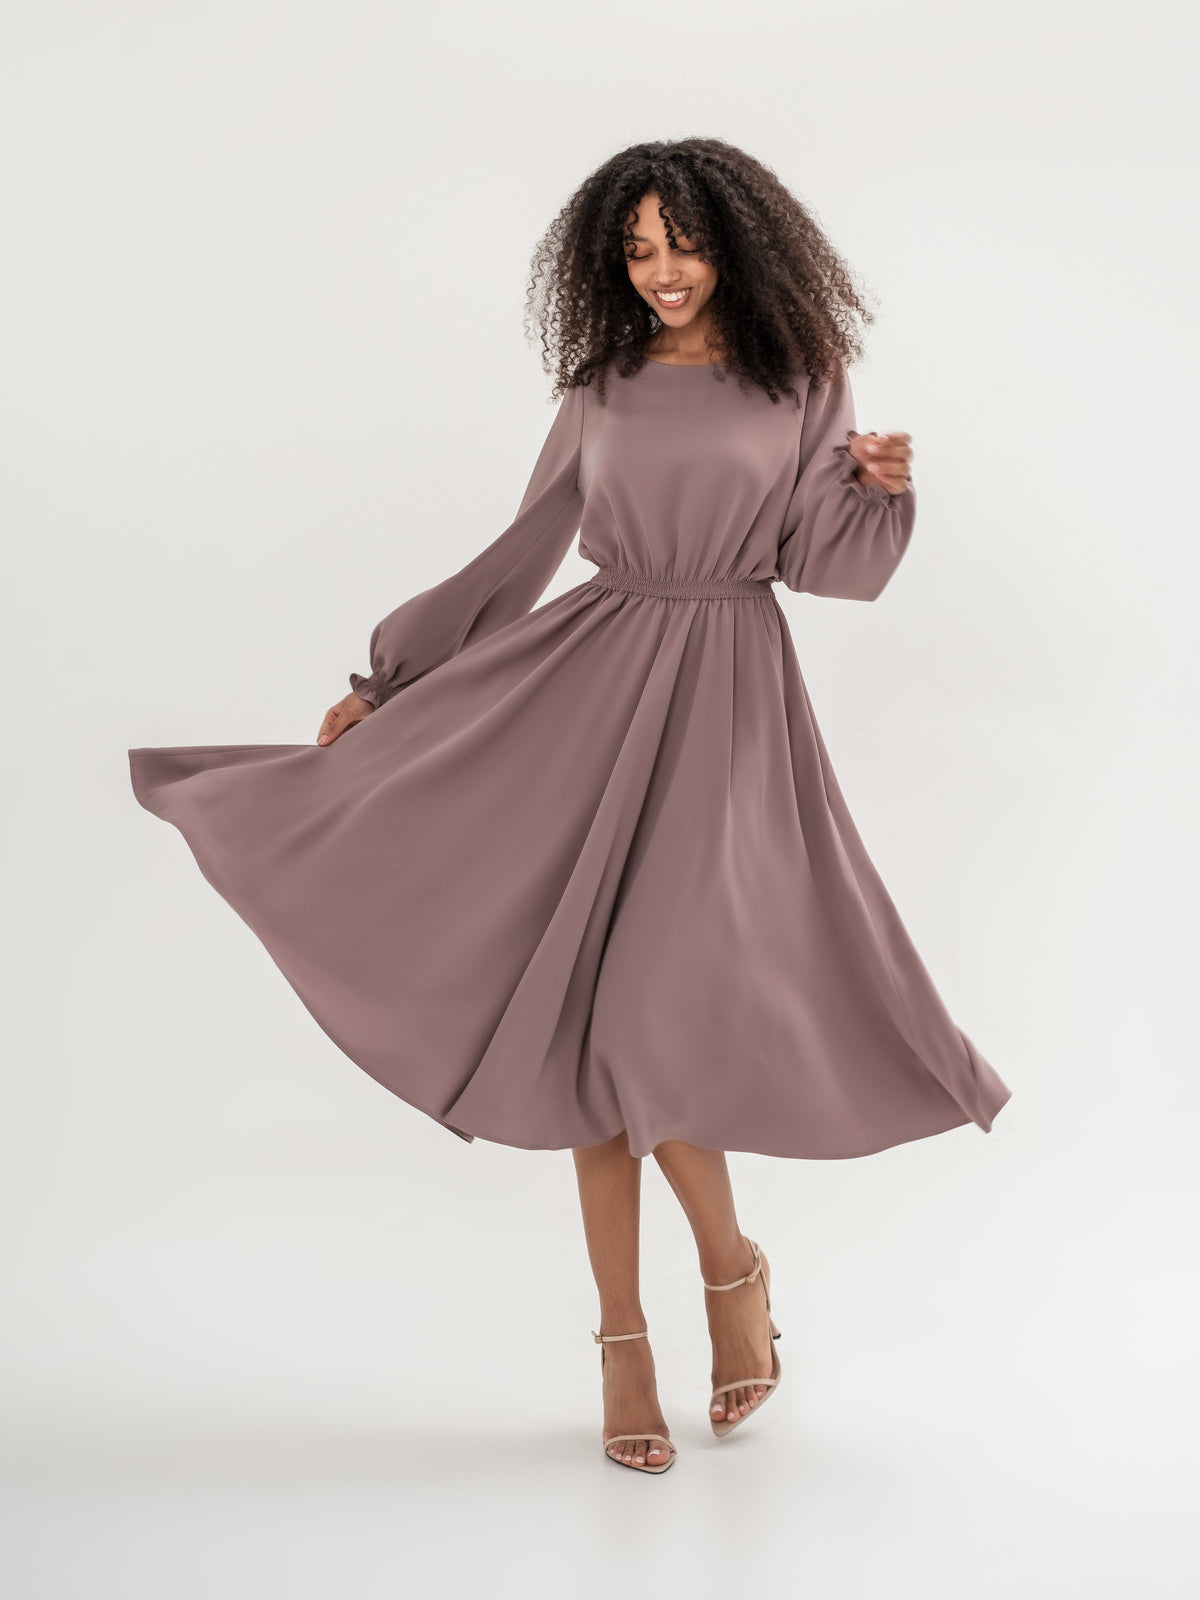 Classic midi cappuccino dress with long sleeves with elastic in the waistband and cuffs